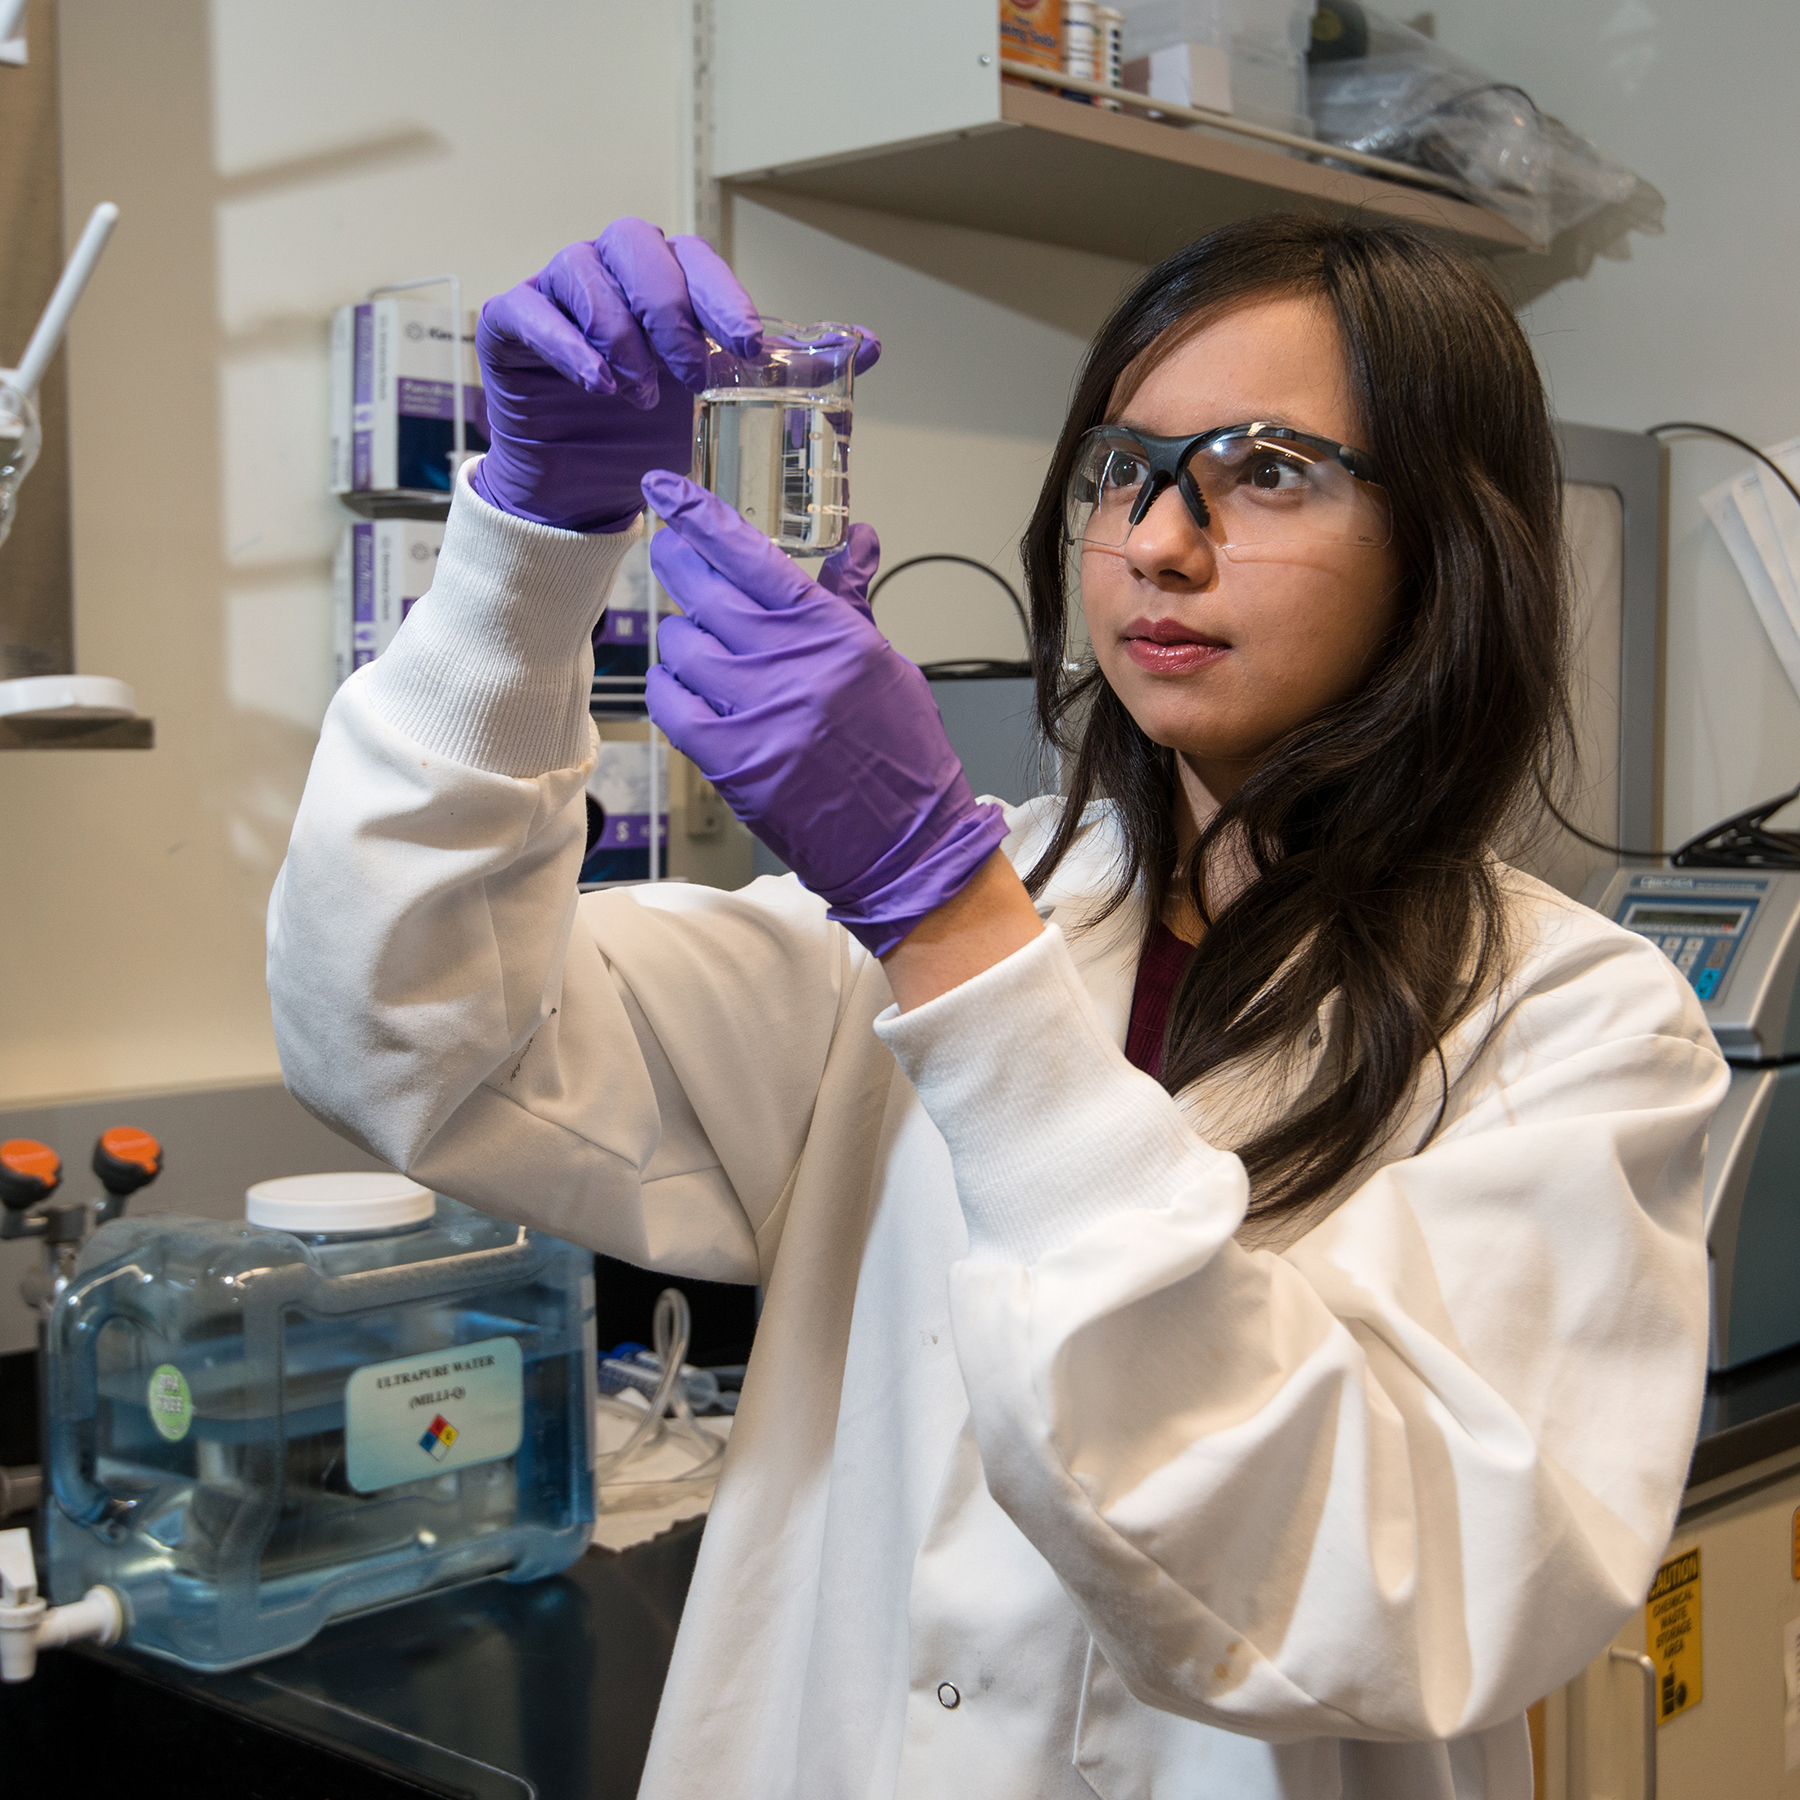 Mansoor received a Fulbright and decided to join Boise State's materials science lab to work on honing the efficacy of water filtration systems